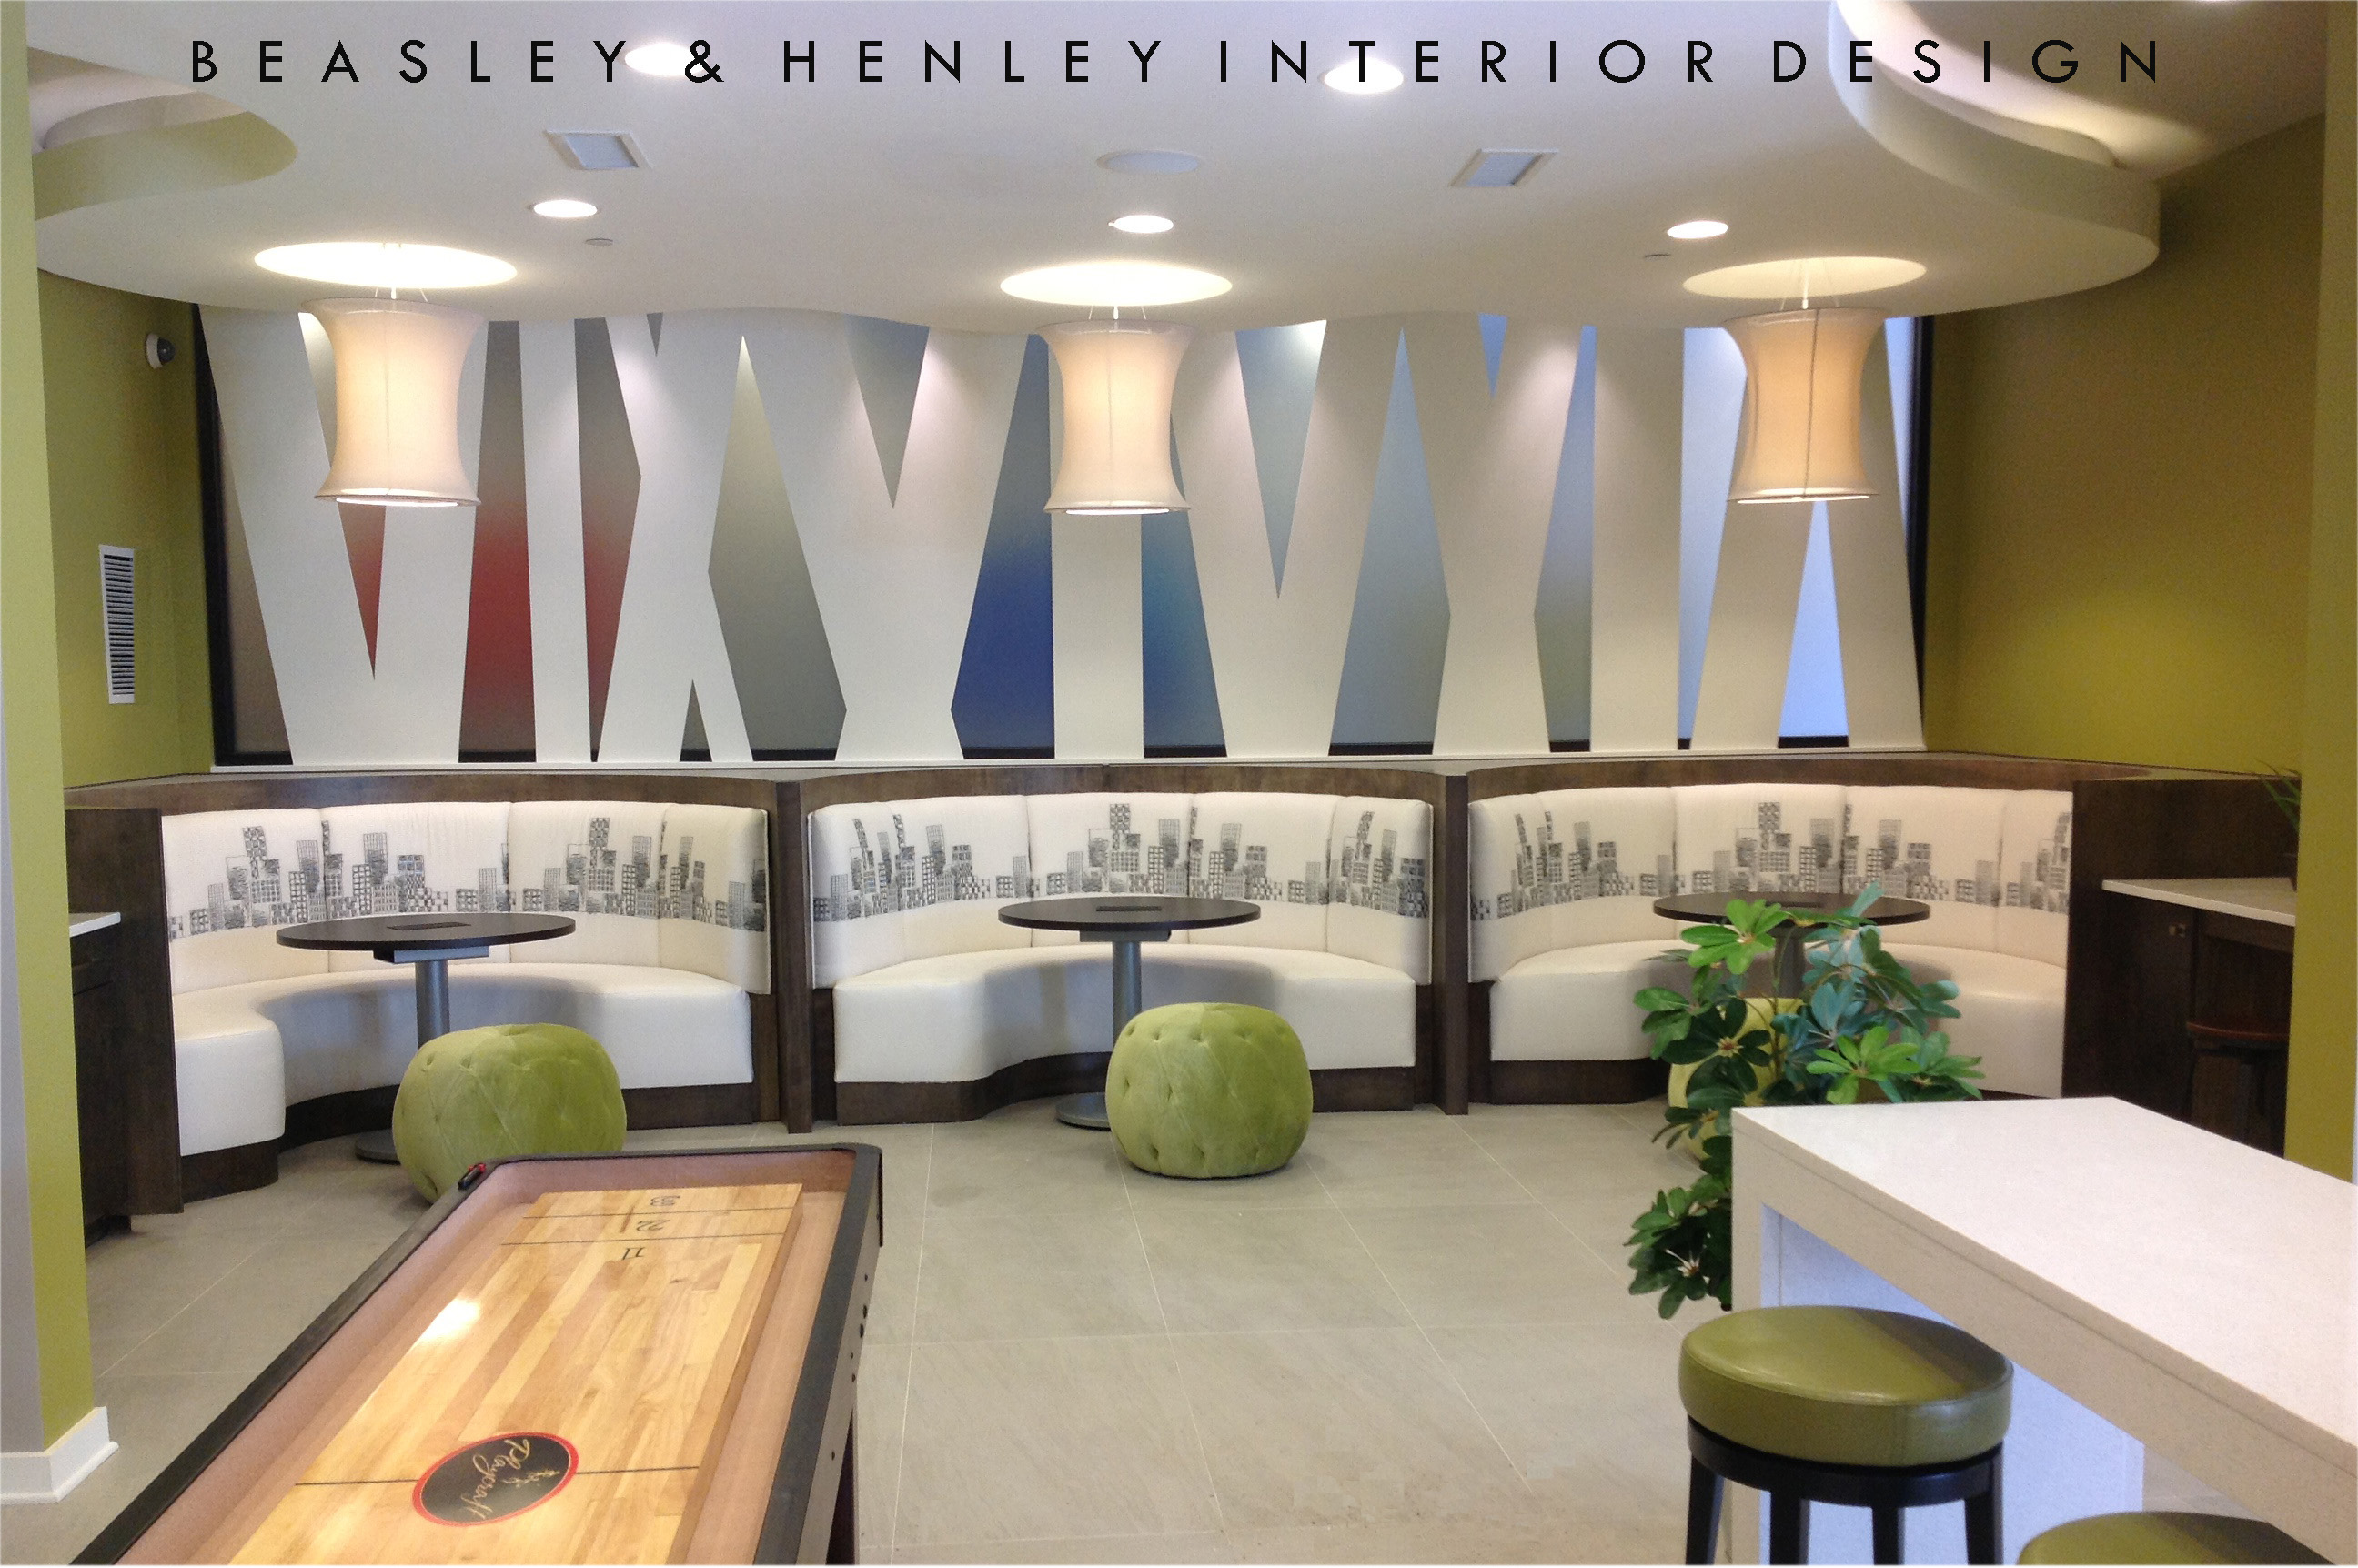 Cyber Cafe @1377by Beasley & Henley Interior Design for Hines in Atlanta